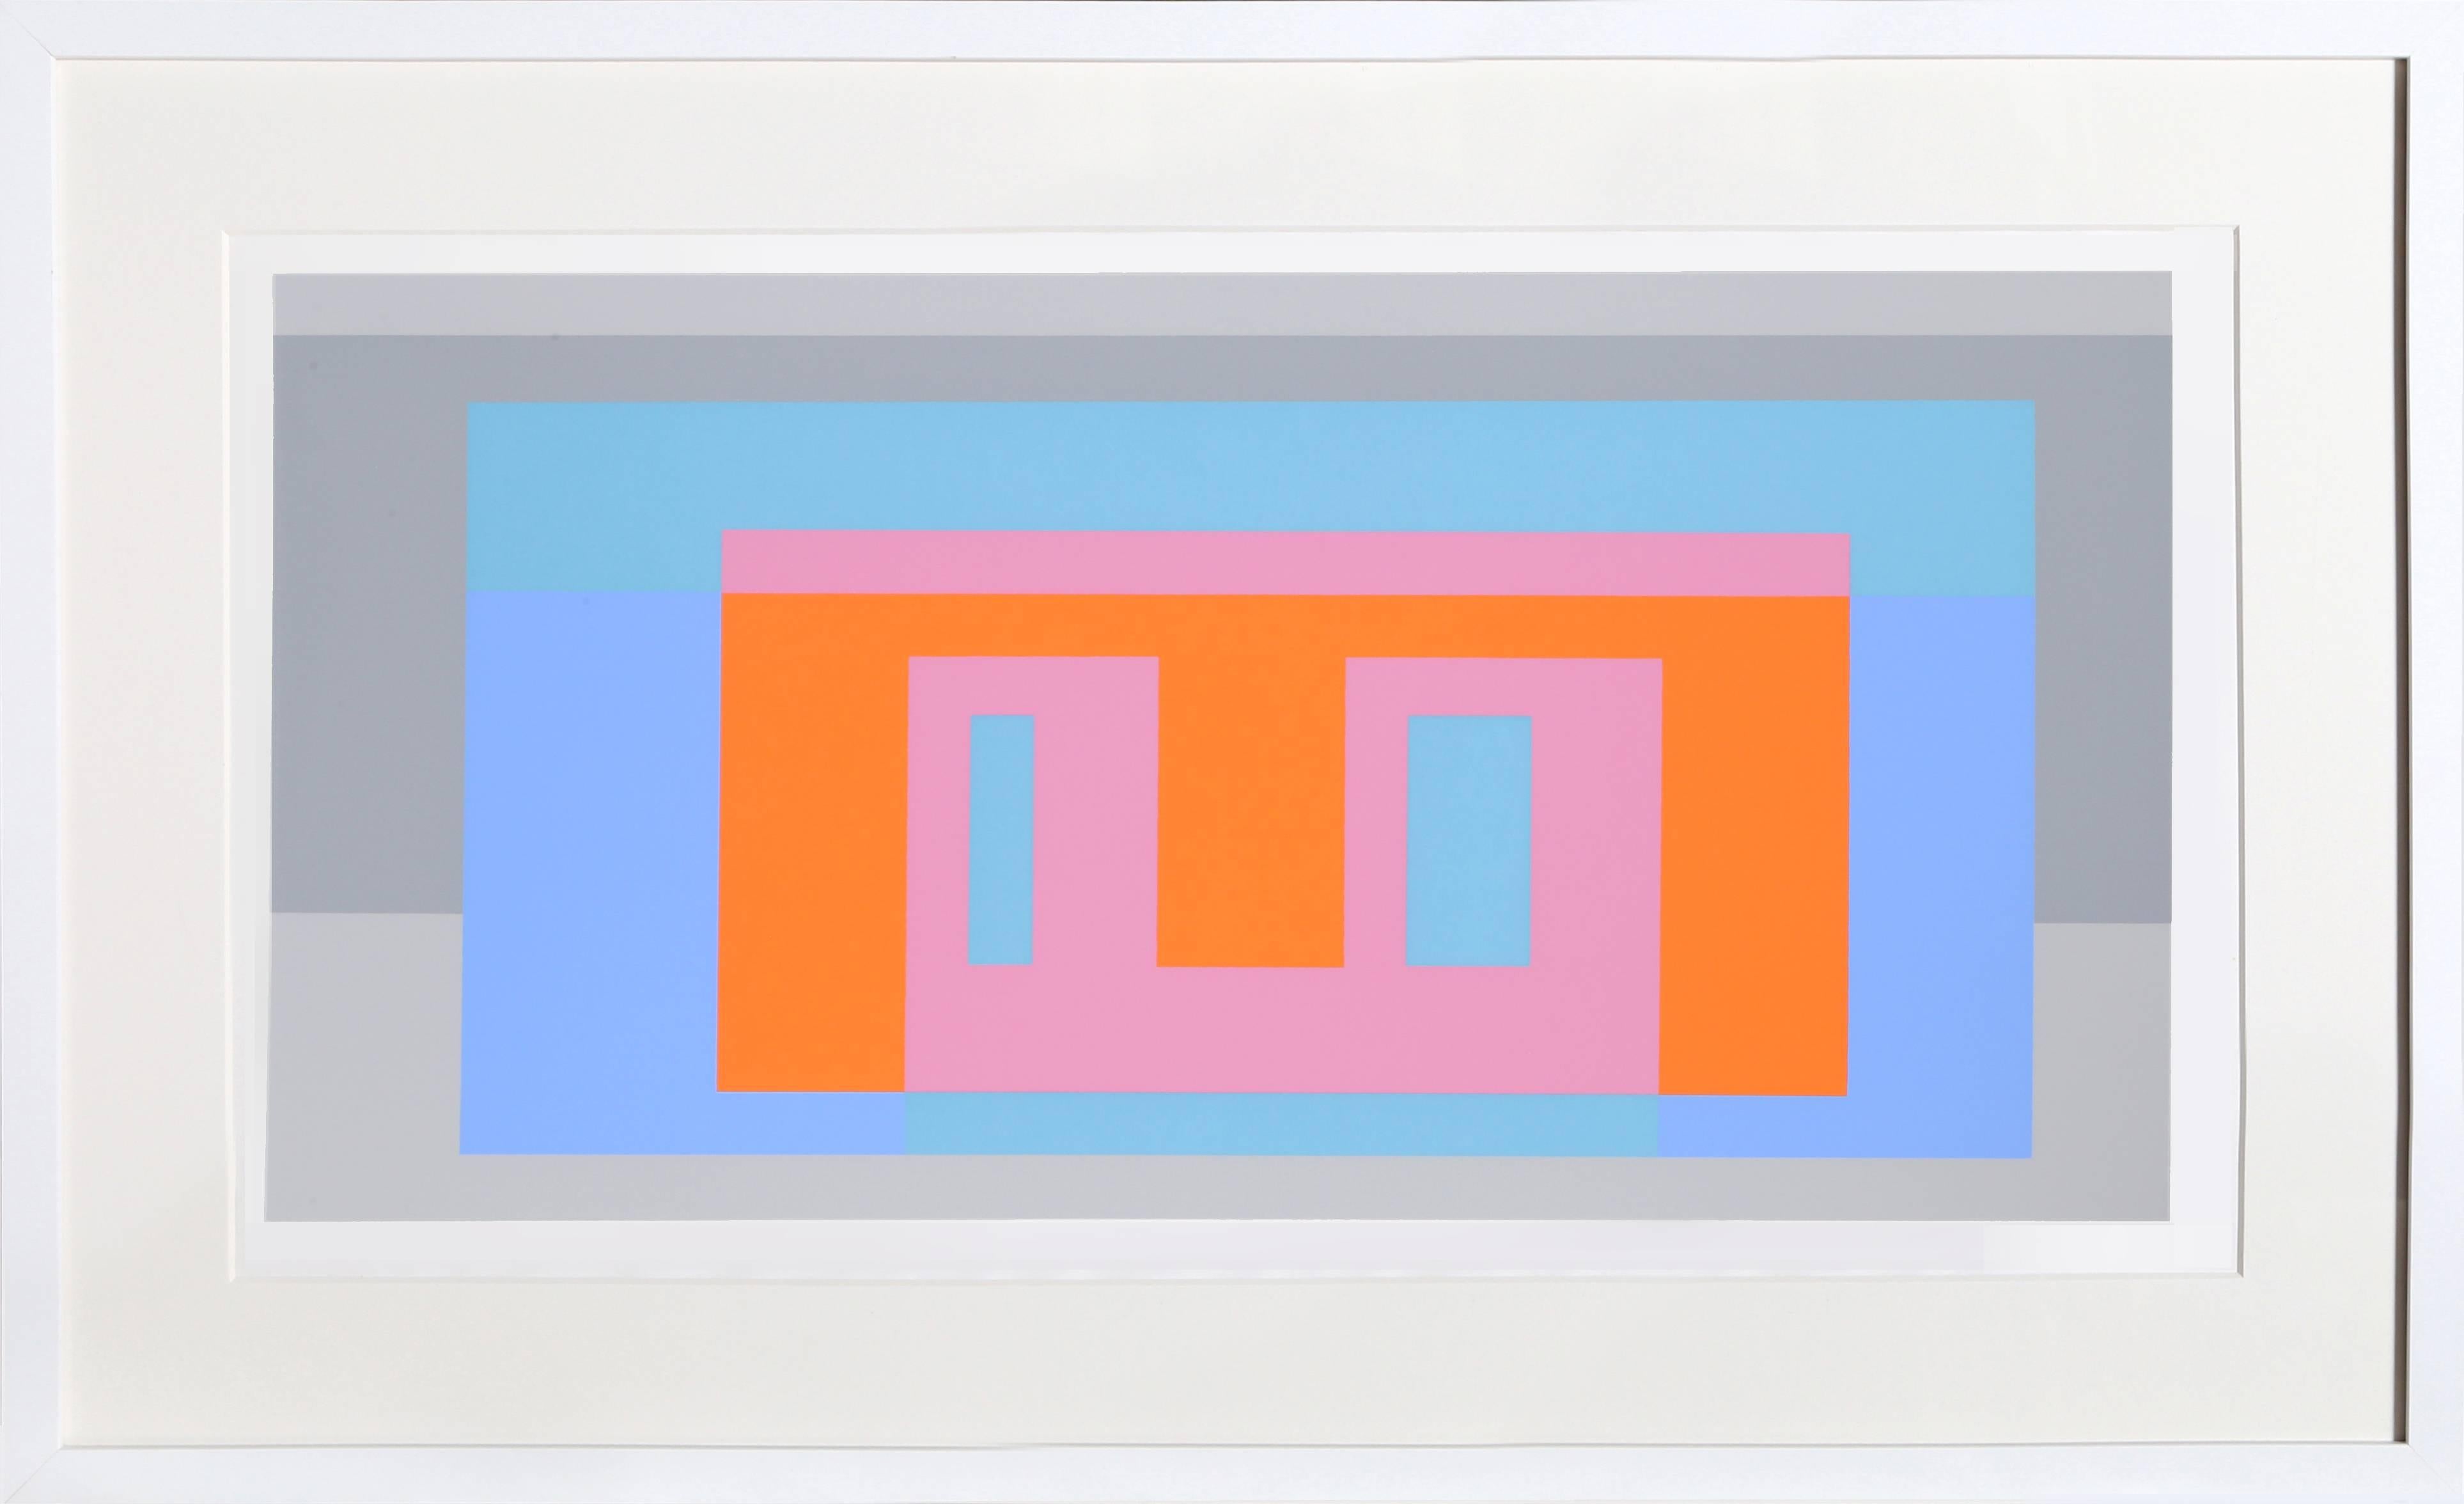 Artist:	Josef Albers
Title:	Portfolio 1, Folder 17, Image 1 
Year:	1972
Medium:	Silkscreen
Edition:	1000
Paper Size:	15 x 20 inches (38.1 x 50.8 cm)
Frame: 18 x 22 inches

from Formulation: Articulation published by Harry N. Abrams, Inc., and New